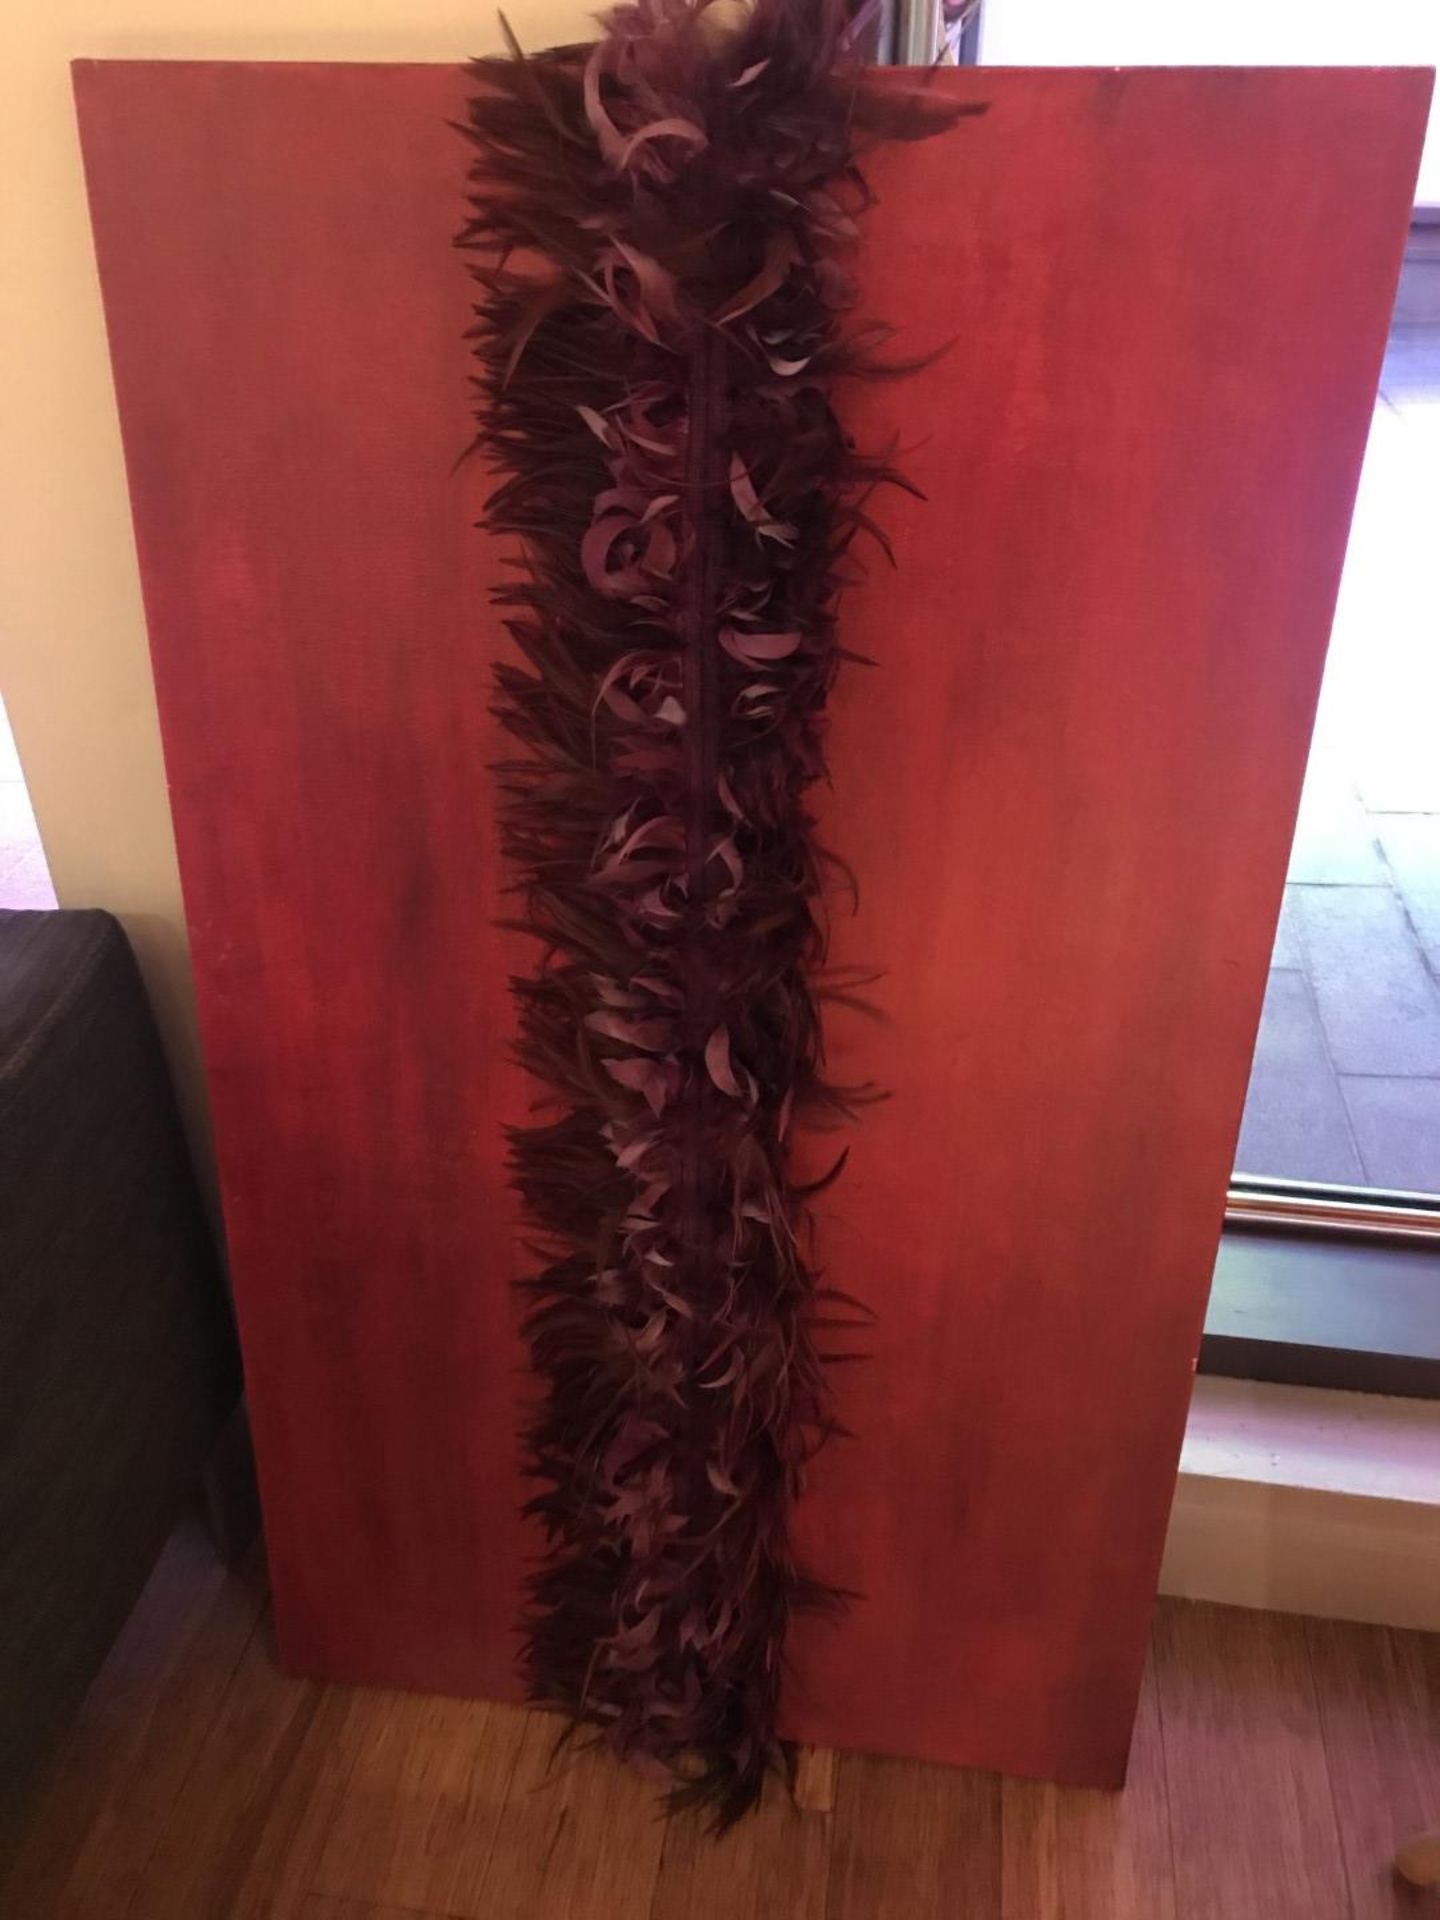 1 x Large Canvas Wall Art Picture With Faux Feather Central Boa - CL587 - Location: London WC2H - Image 3 of 3